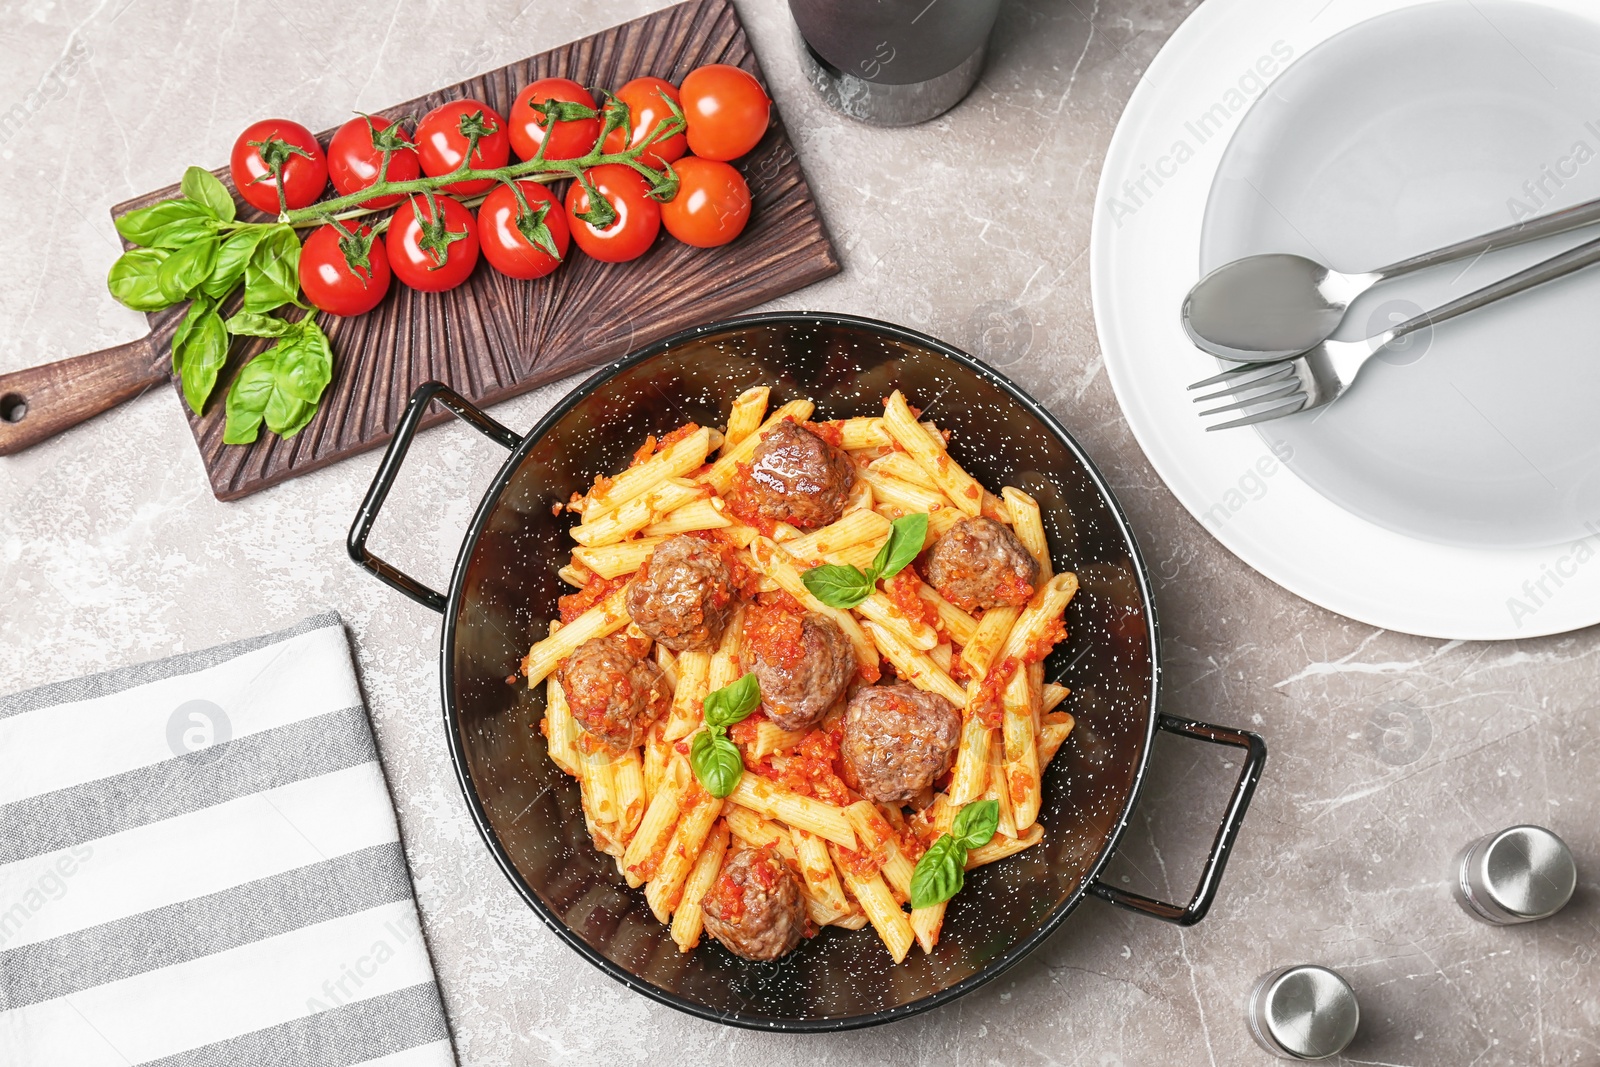 Photo of Pasta with meatballs and tomato sauce on grey background